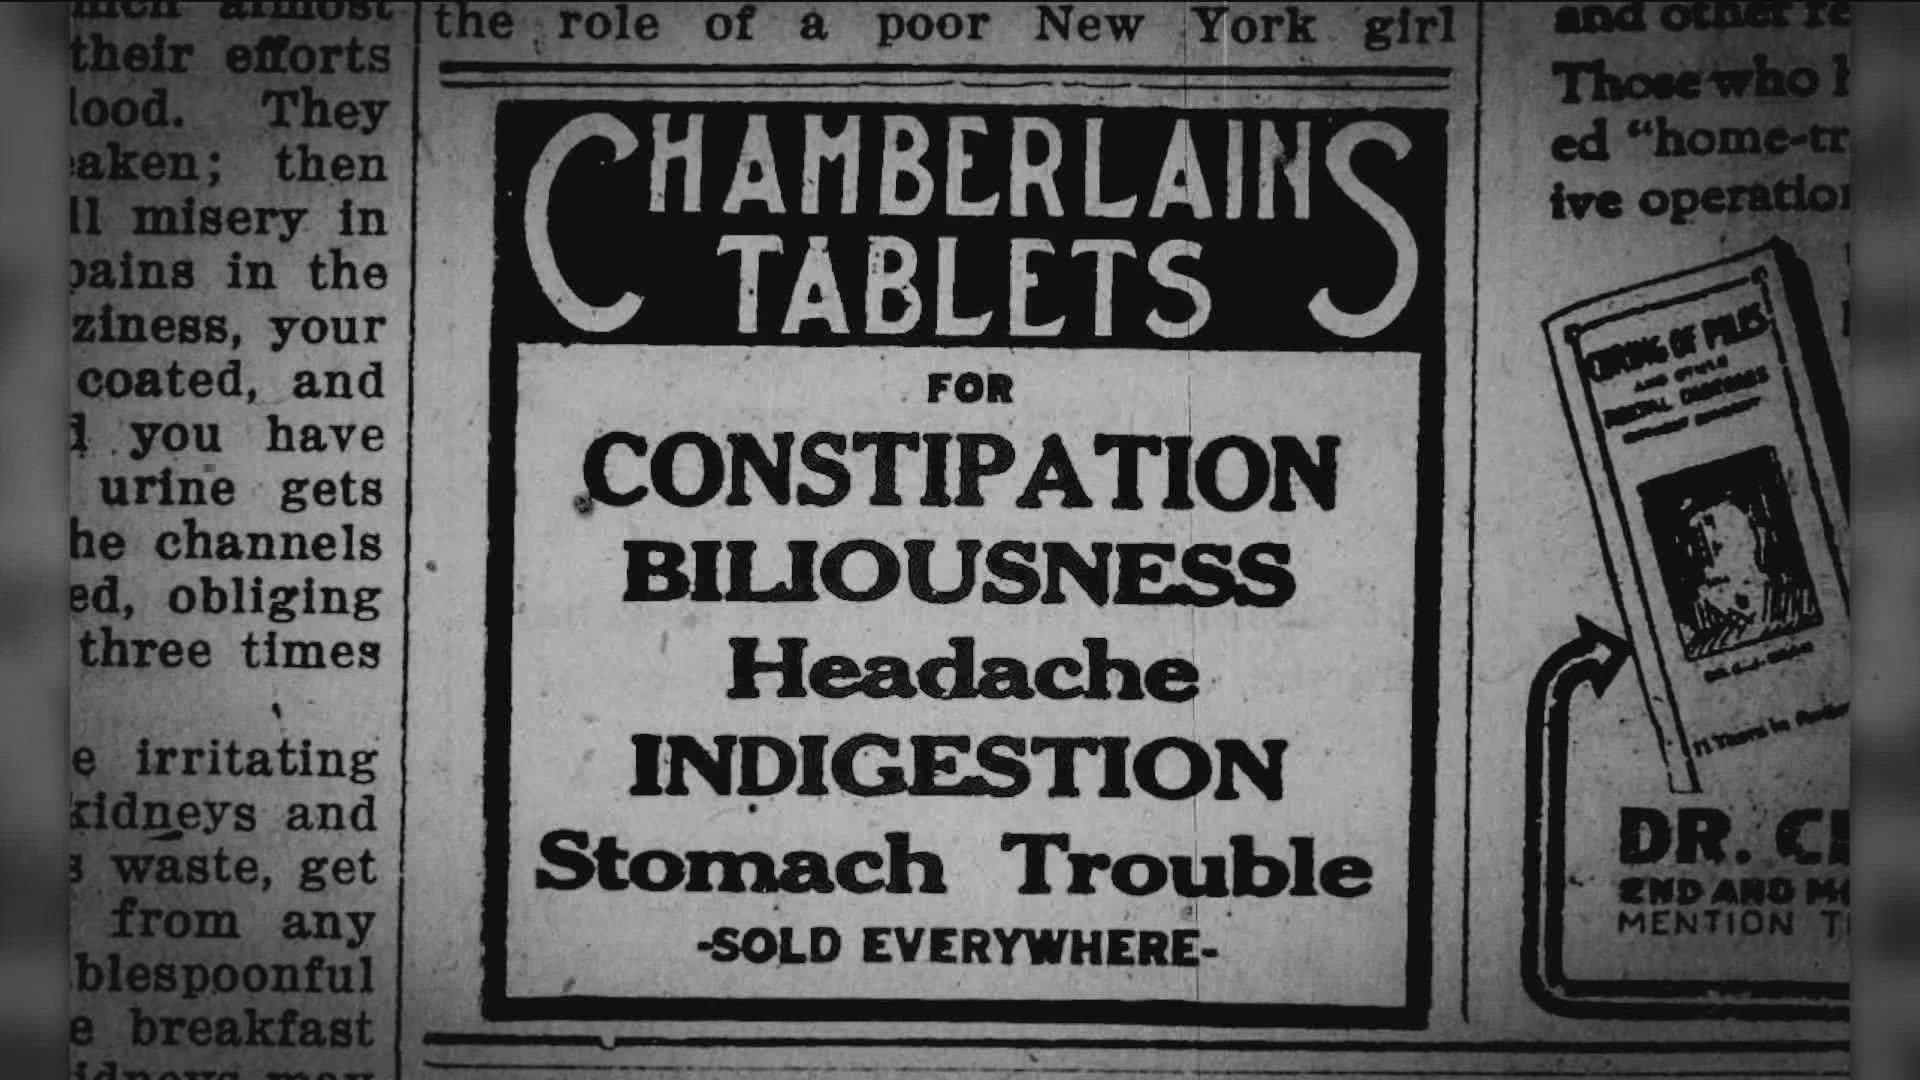 100 years ago today, headlines were focused on legislation, communication and constipation;  that's what they were talking about in Idaho's only college town in 1923